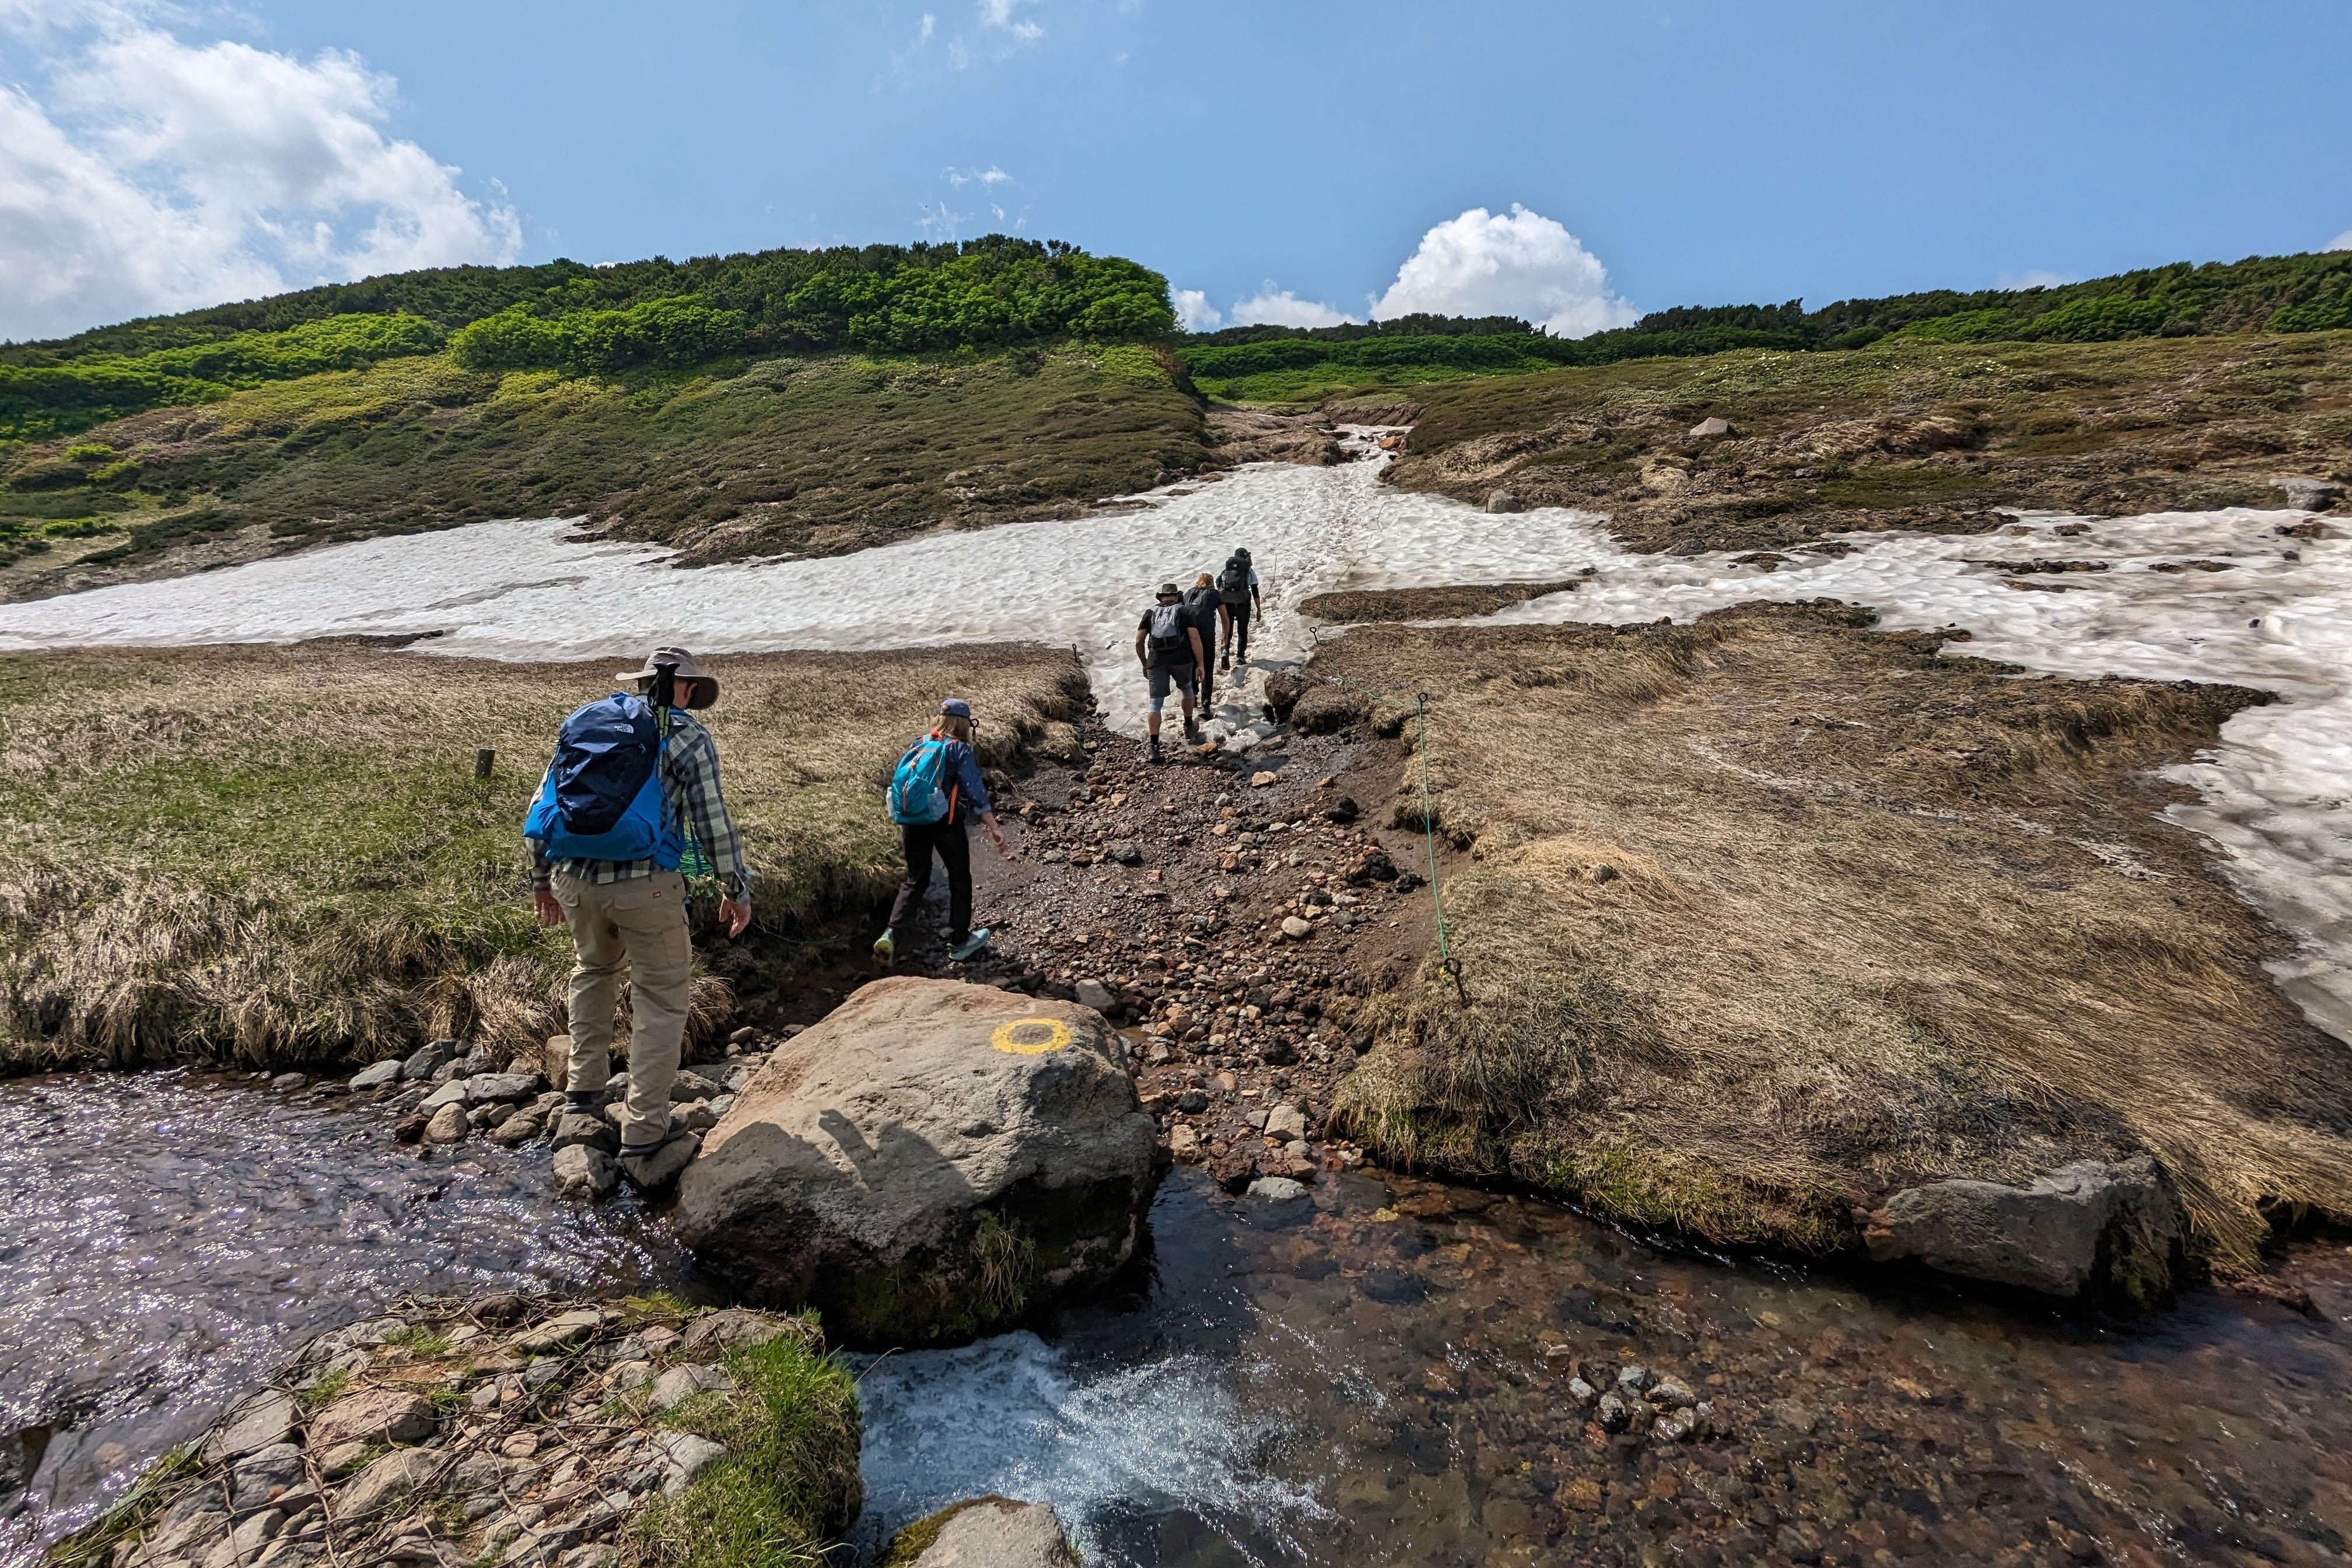 A group of hikers traverse difficult terrain, including a small stream, loose rocks and a snowfield.